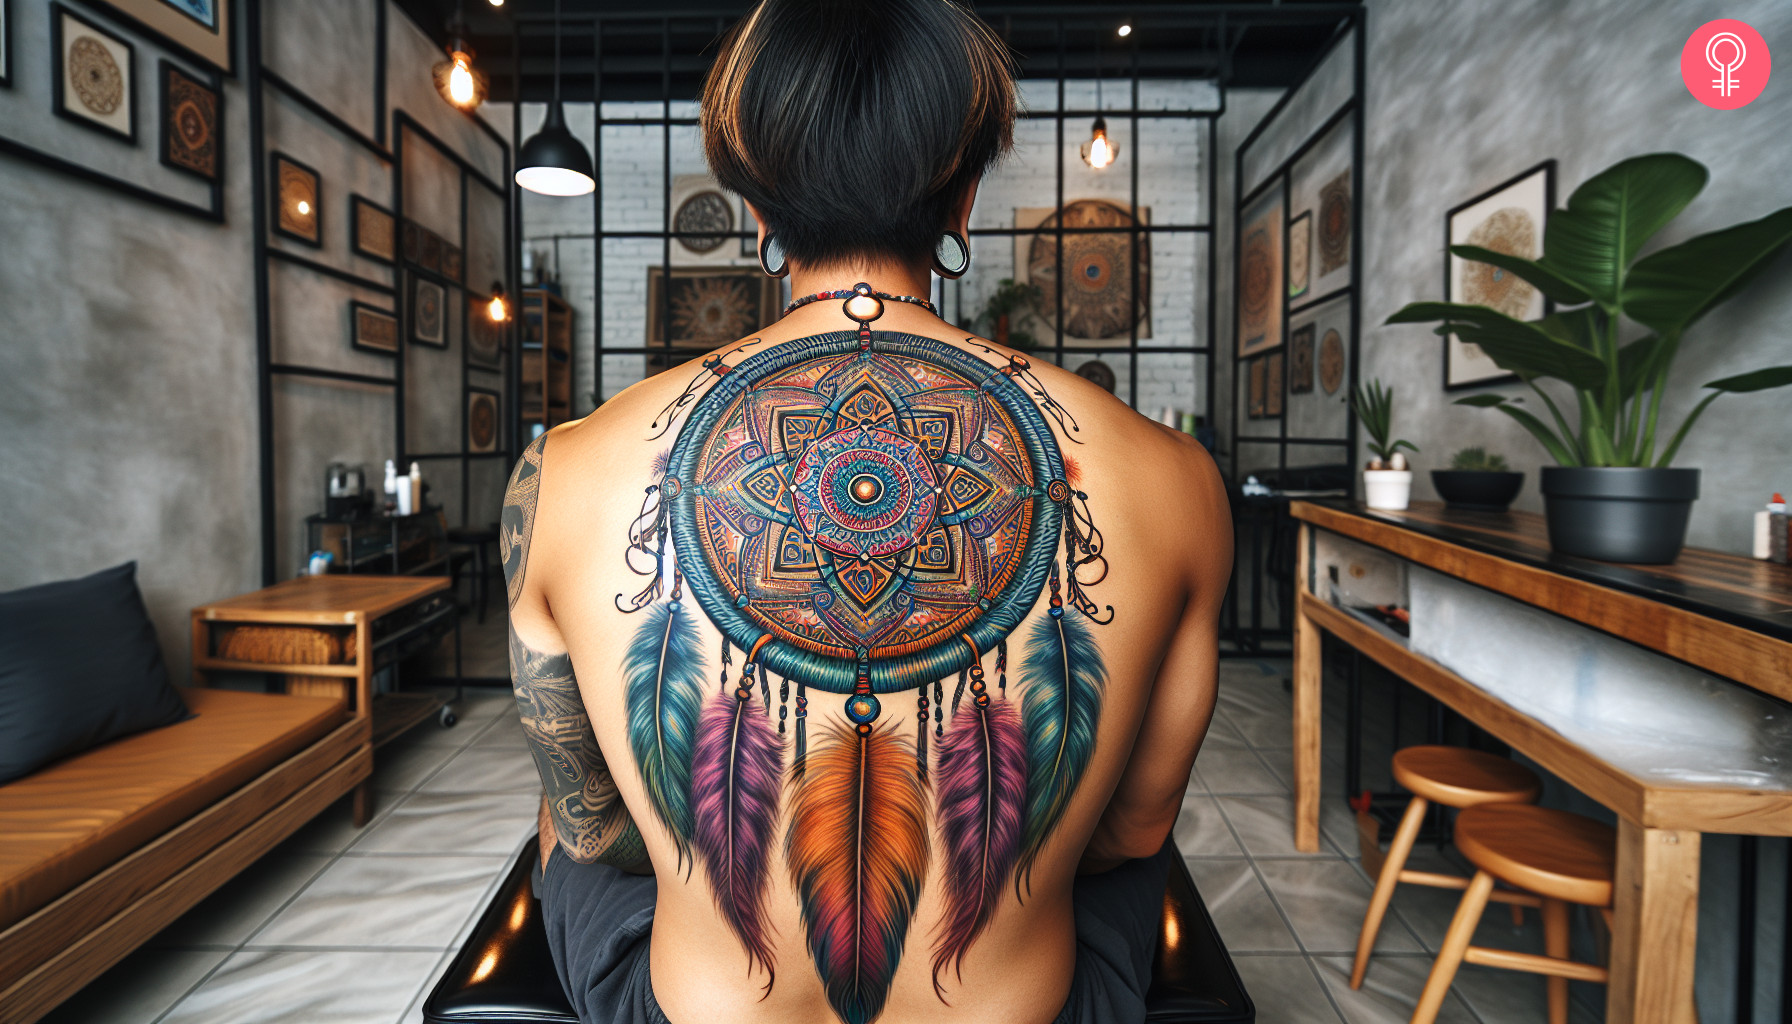 A spiritual hippie tattoo on the back of a man